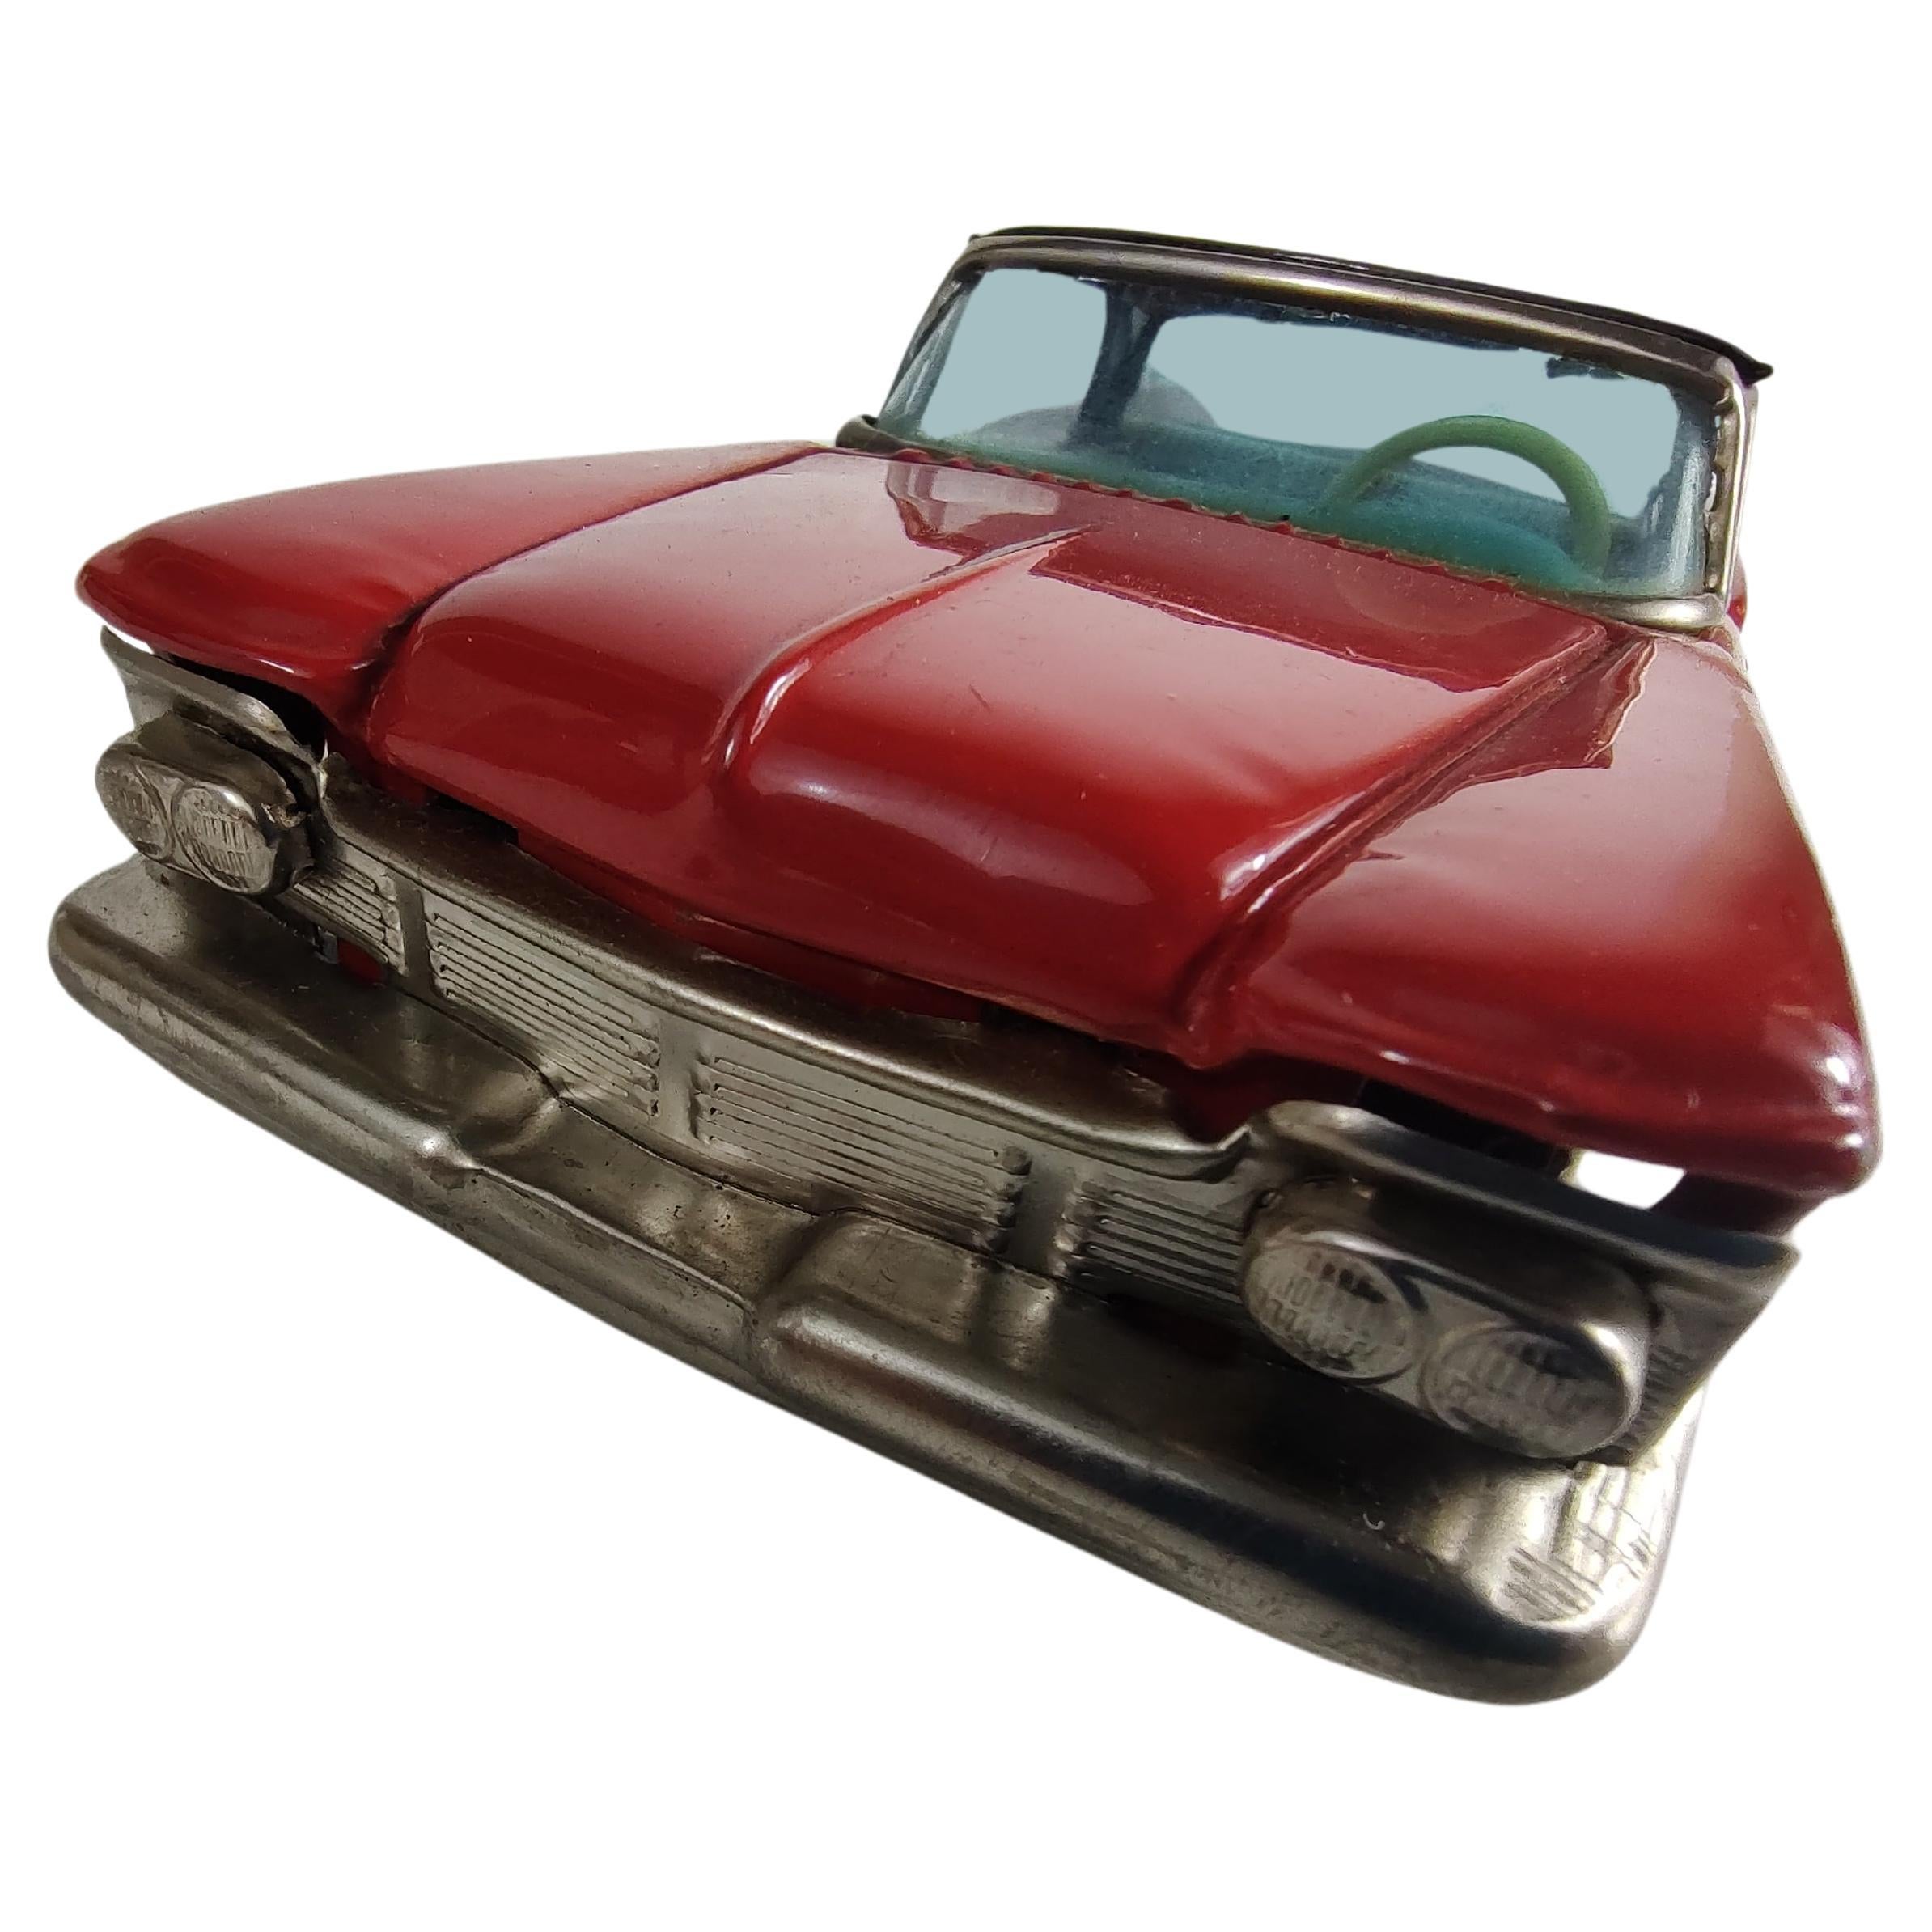 Industrial Midcentury Tin Litho Toy Car by Bandai Japan 1959 Chrysler Imperial in Red Black